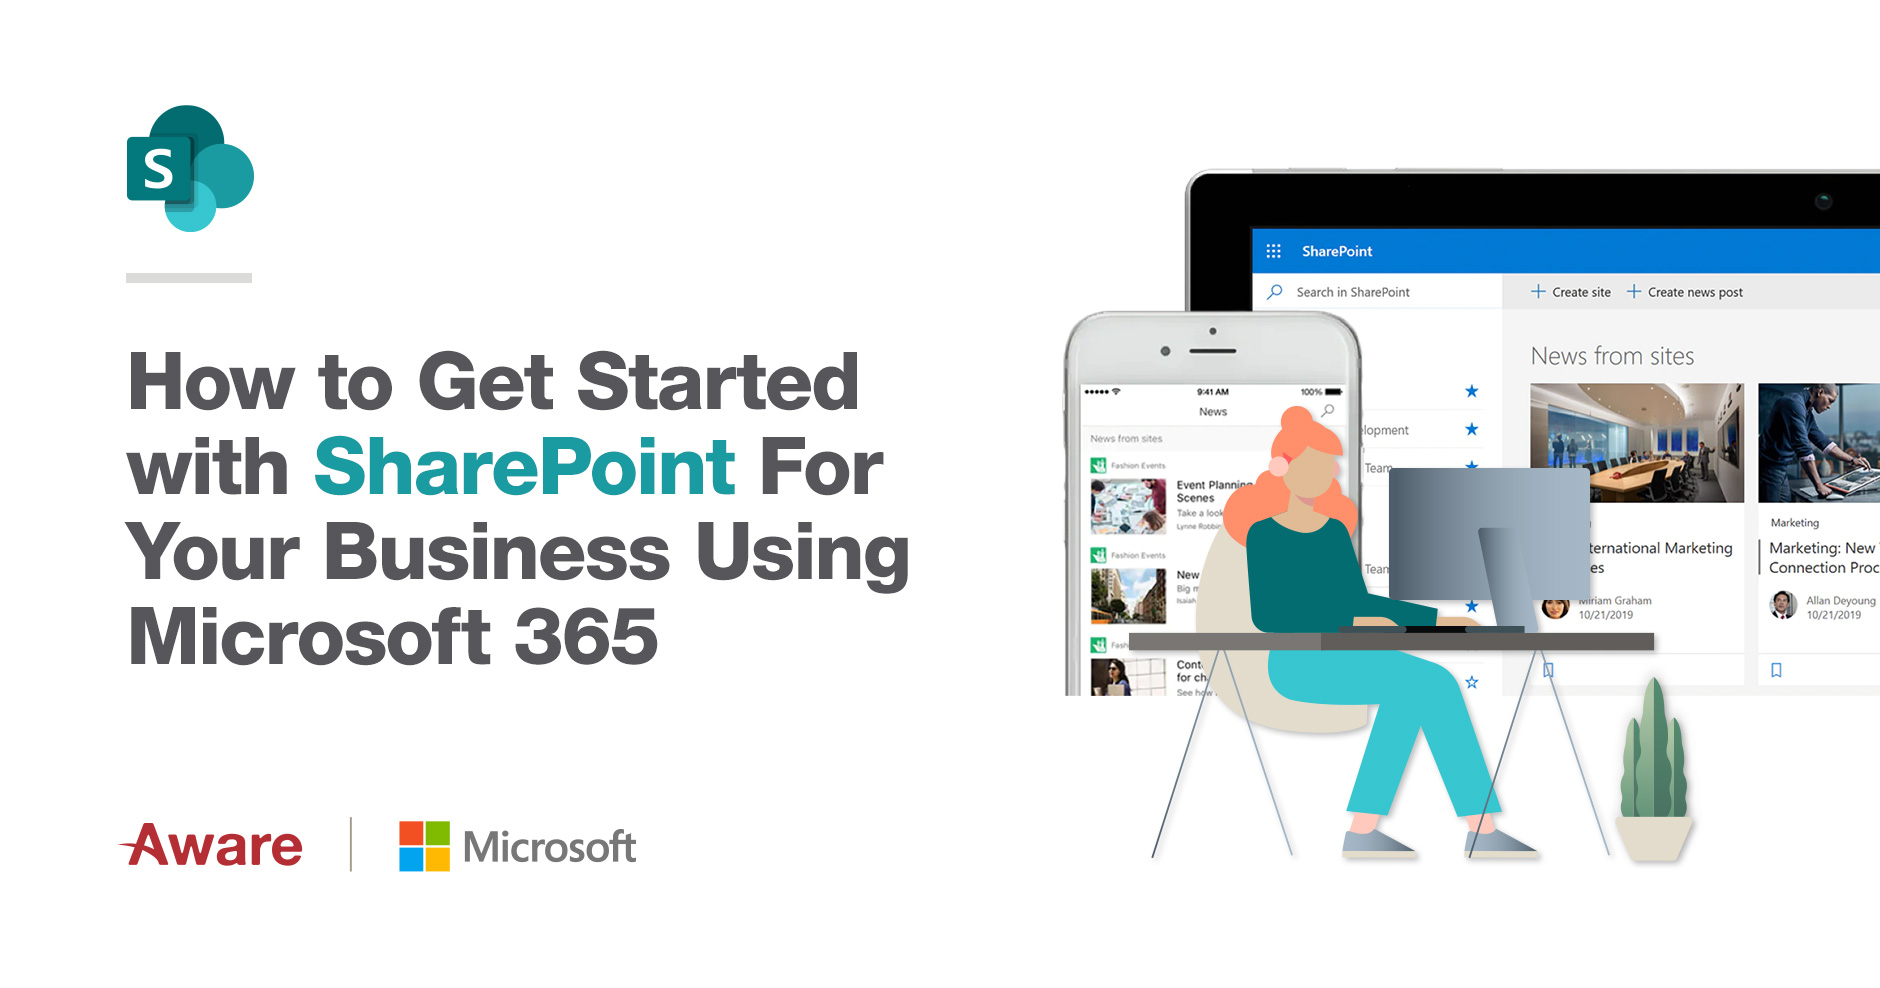 How to Get Started with SharePoint For Your Business Using Microsoft 365